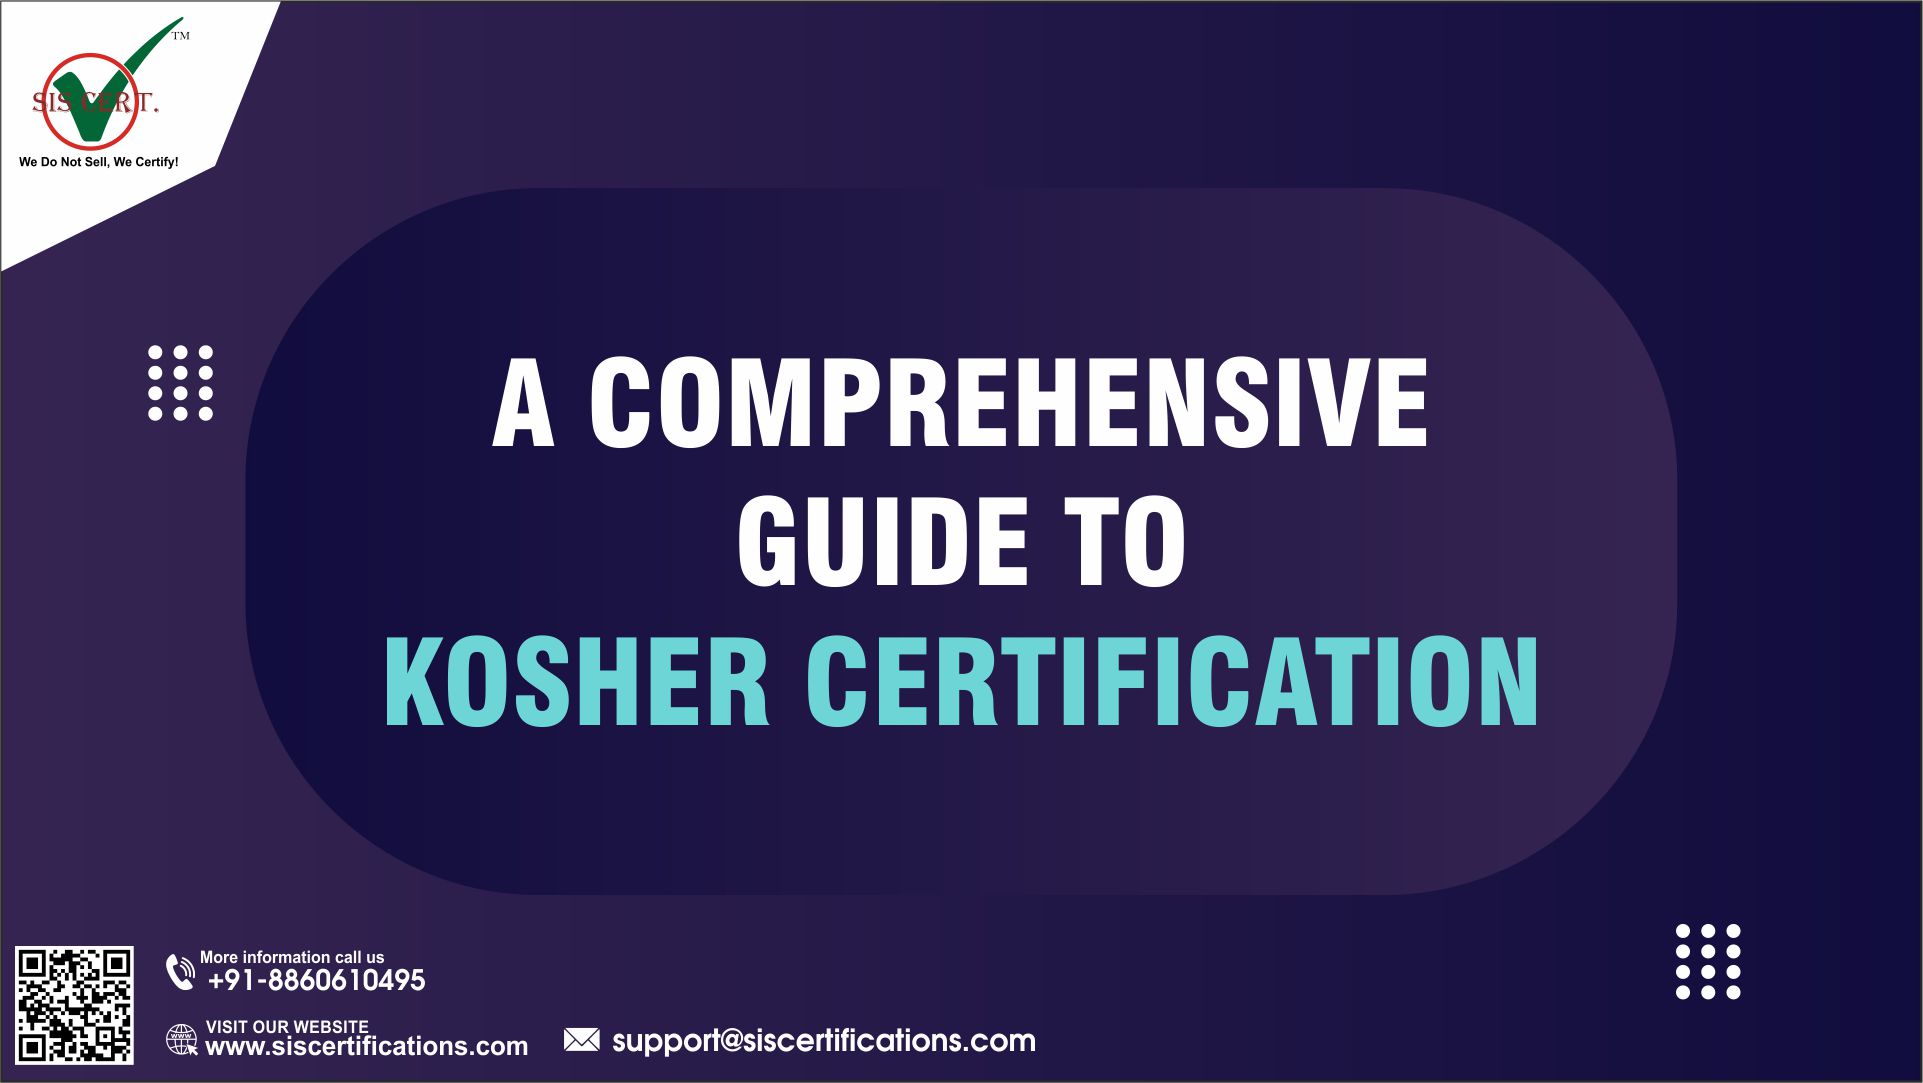 A Comprehensive Guide to Kosher Certification